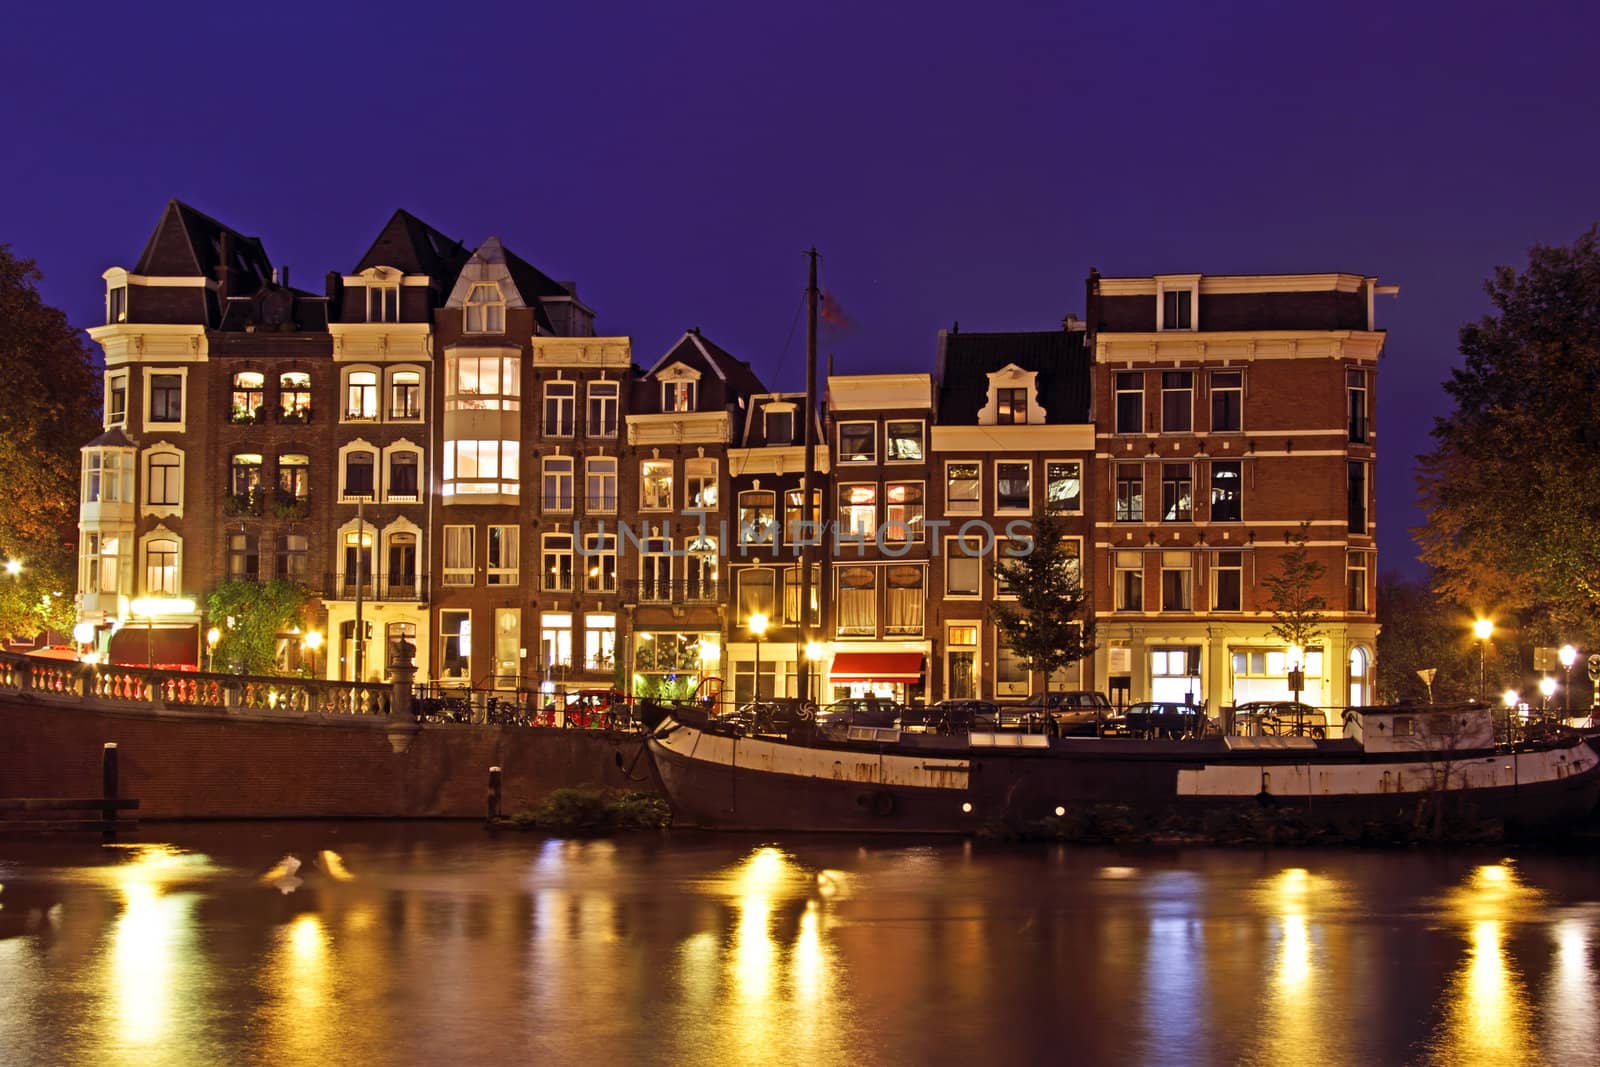 Medieval houses in Amsterdam the Netherlands at night by devy